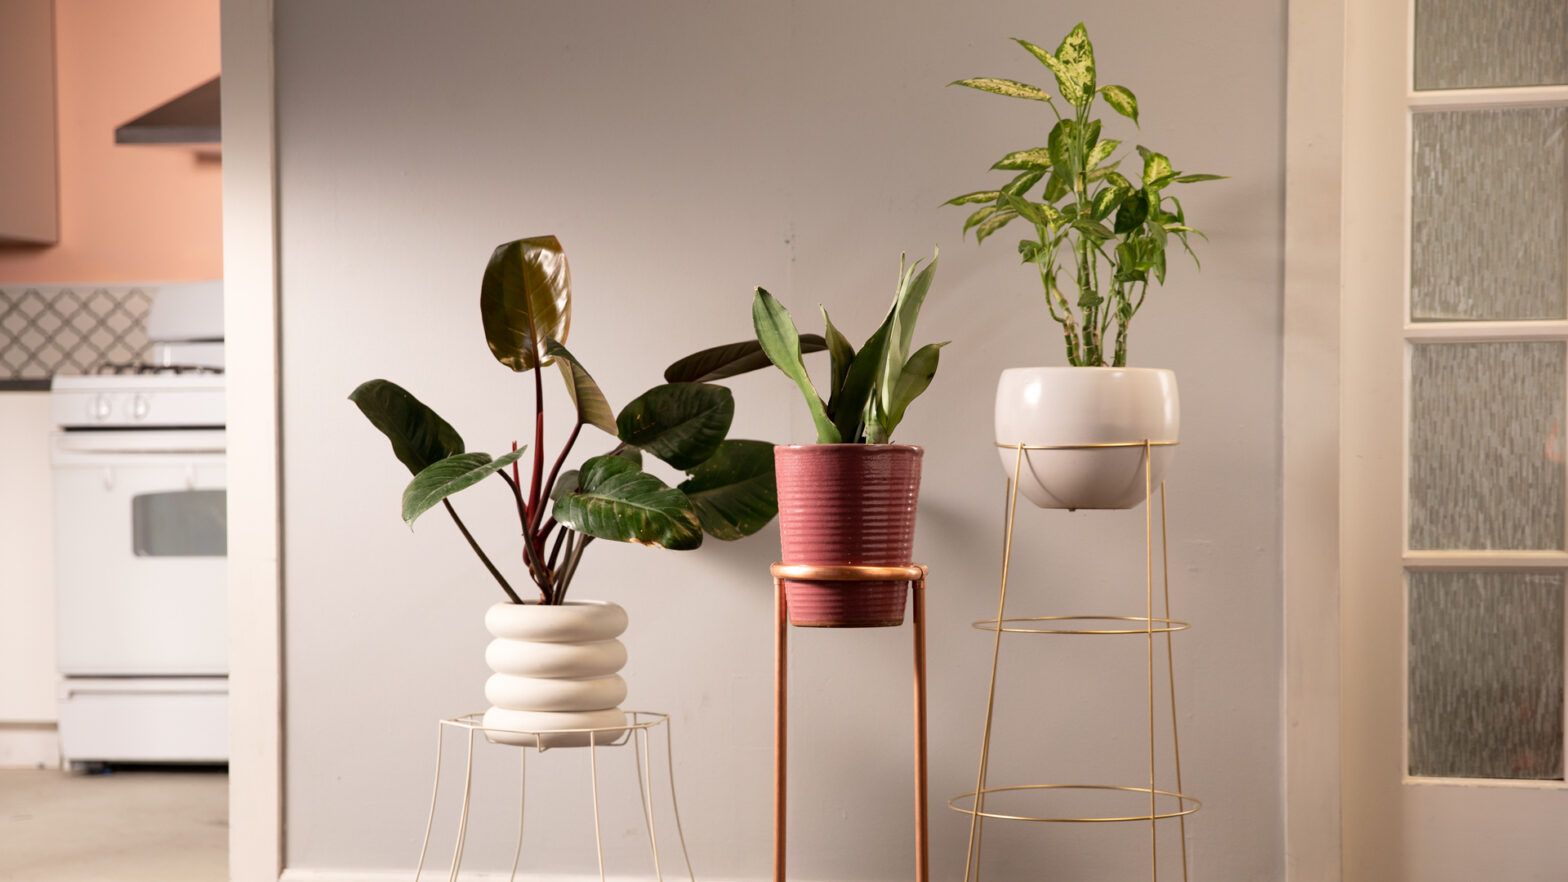 Diy Modern Plant Stands 3 Ways In 15 Minutes Or Less | Geico Living With Modern Plant Stands (View 12 of 15)